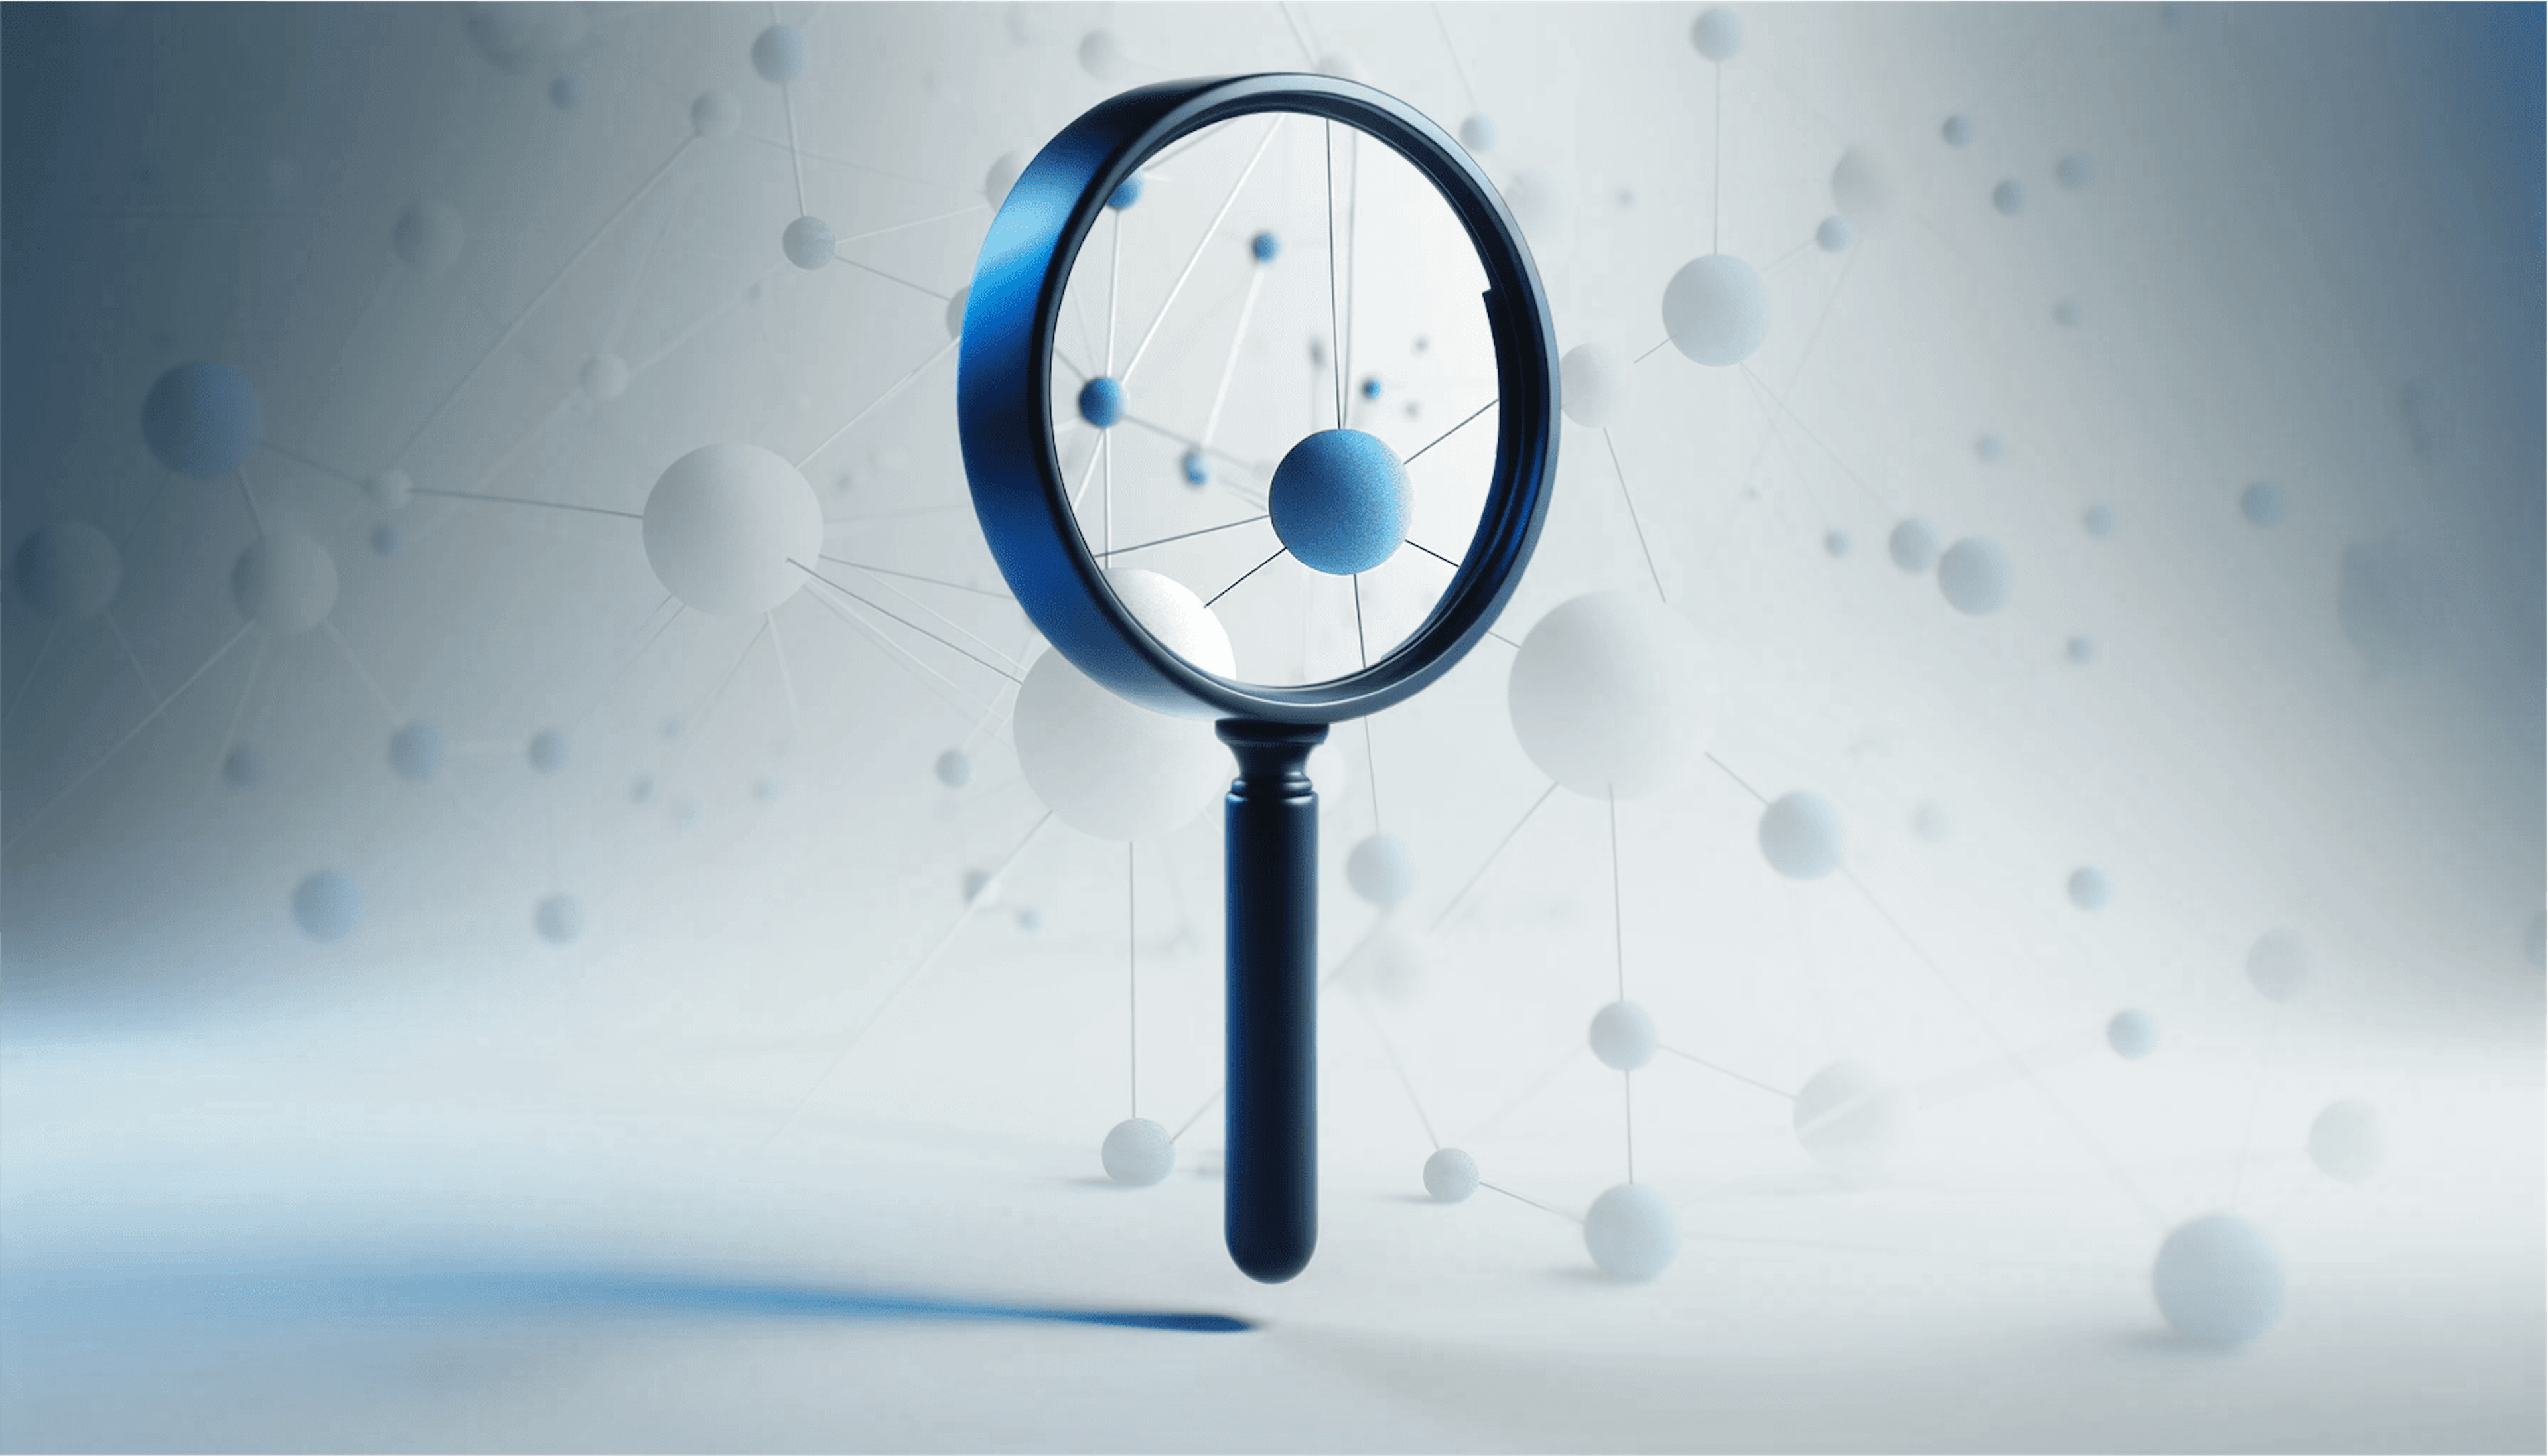 Magnifying glass focusing on a network of interconnected blue and white spheres, symbolizing exploration and analysis of connections.